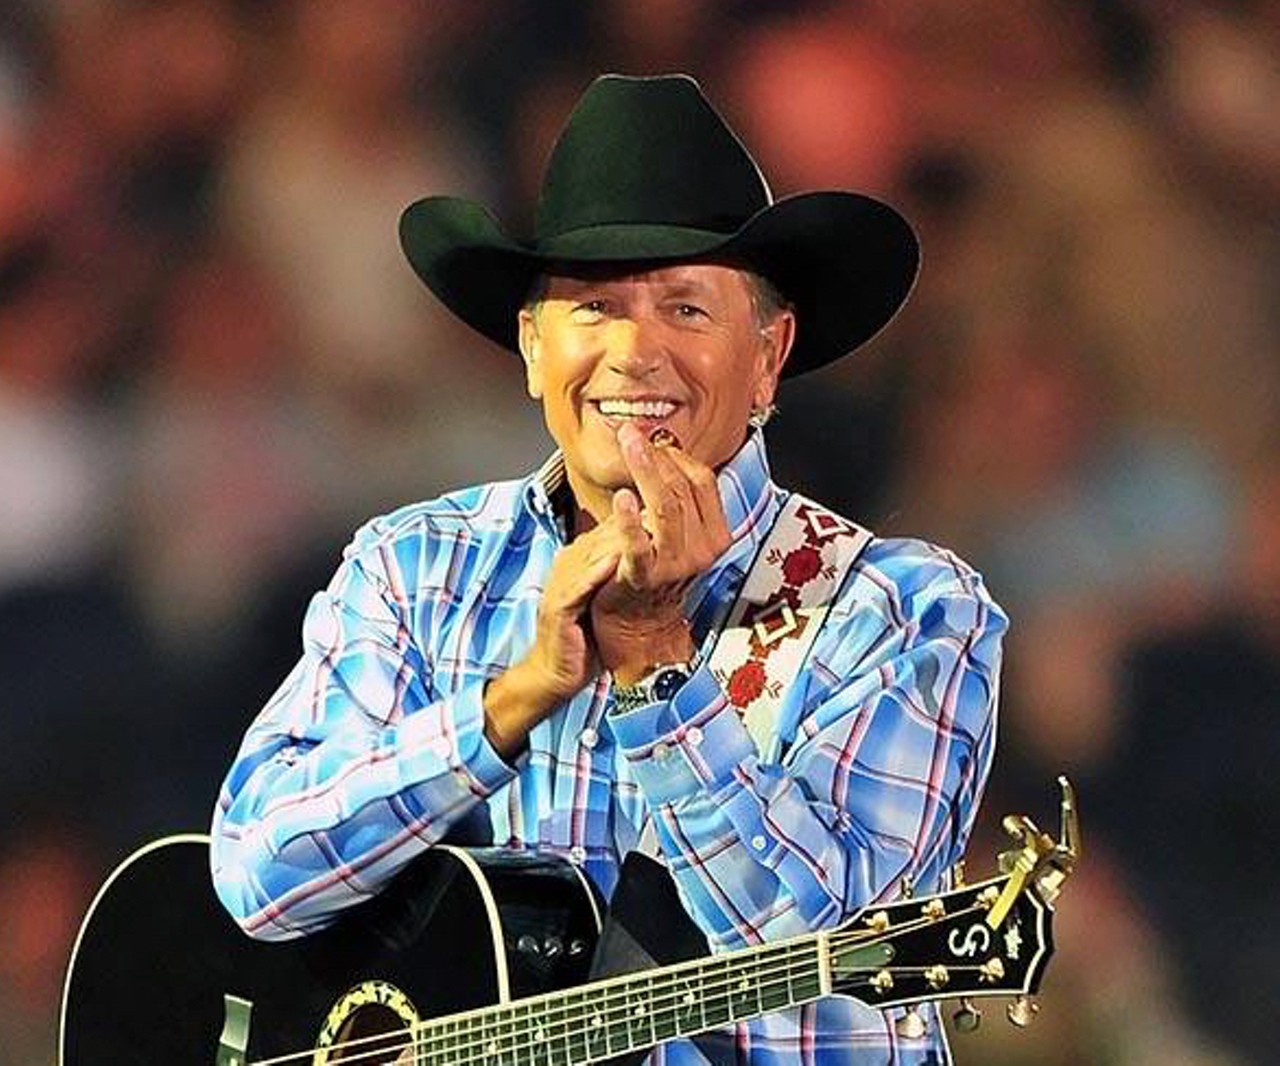 George Strait
Poteet-born Strait has stayed true to his SA roots during the course of a country music career that included more than 40 chart-topping singles. Although he retired from touring in 2012, the singer's distinctive Western swing-influenced is still popular on country radio, and he's a revered local celebrity.
Photo via Facebook / George Strait